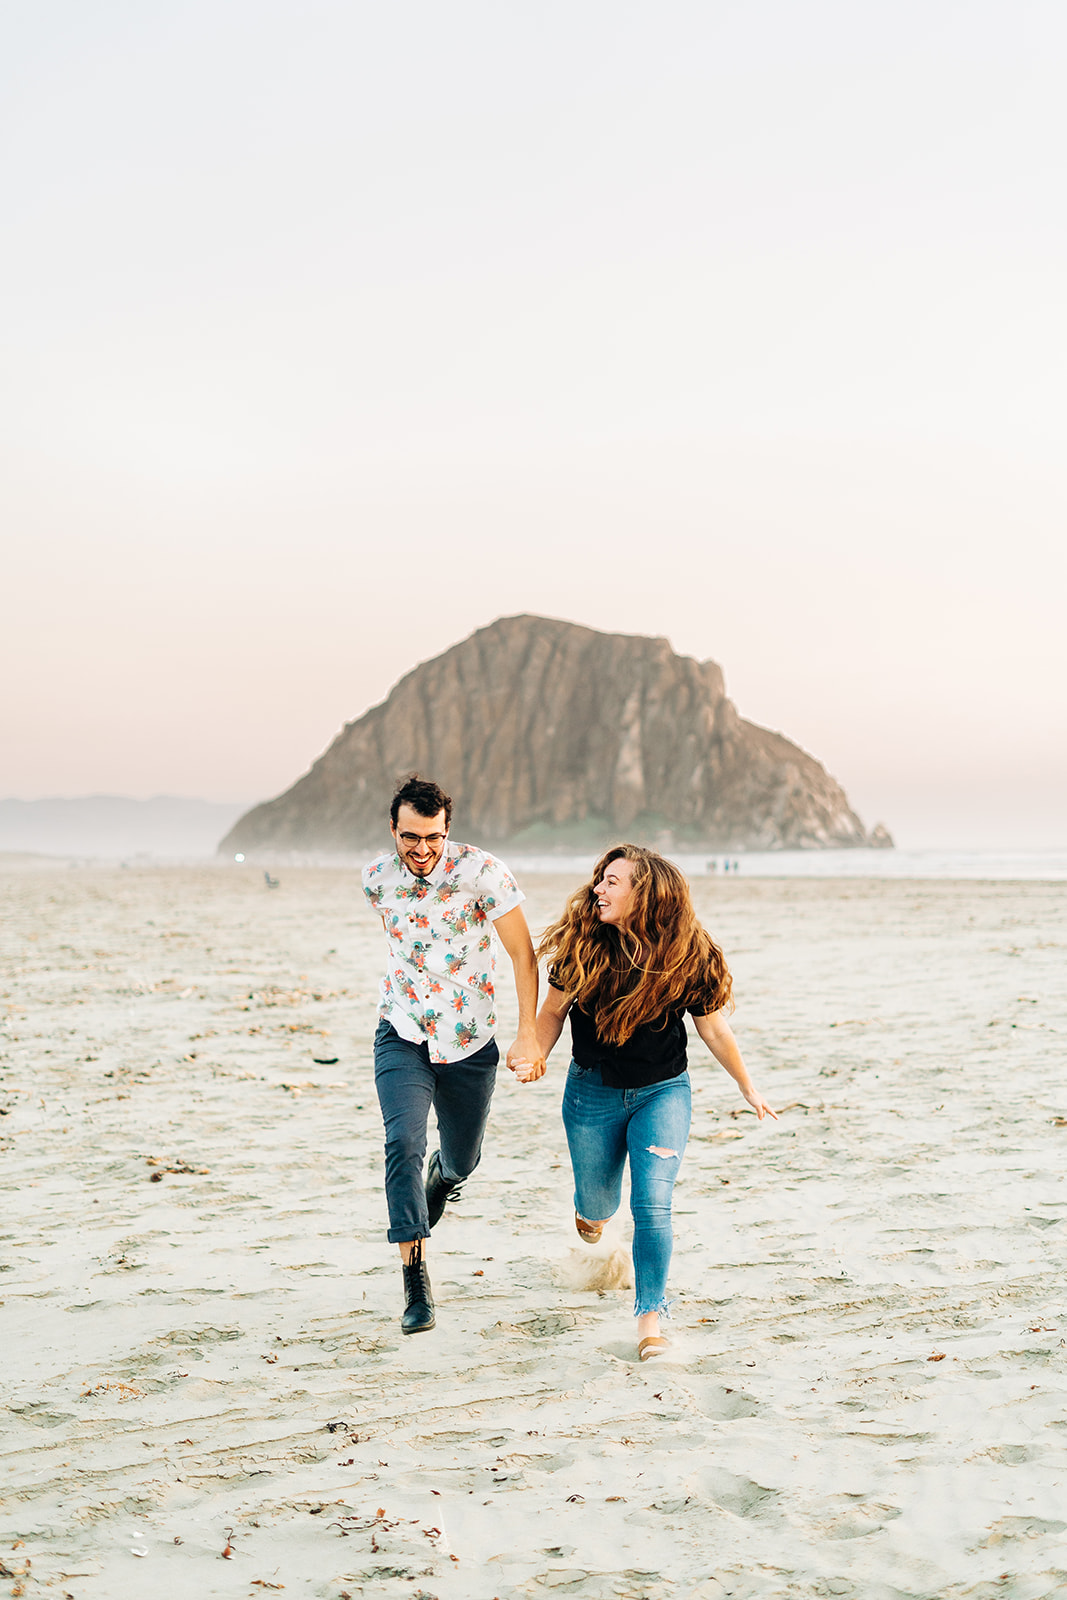 Sunset Engagement Photos at Morro Bay, morro bay wedding photographer; a man and woman holding hands running towards the camera, they are running on the sand and the Morro Bay rock formation is behind them.